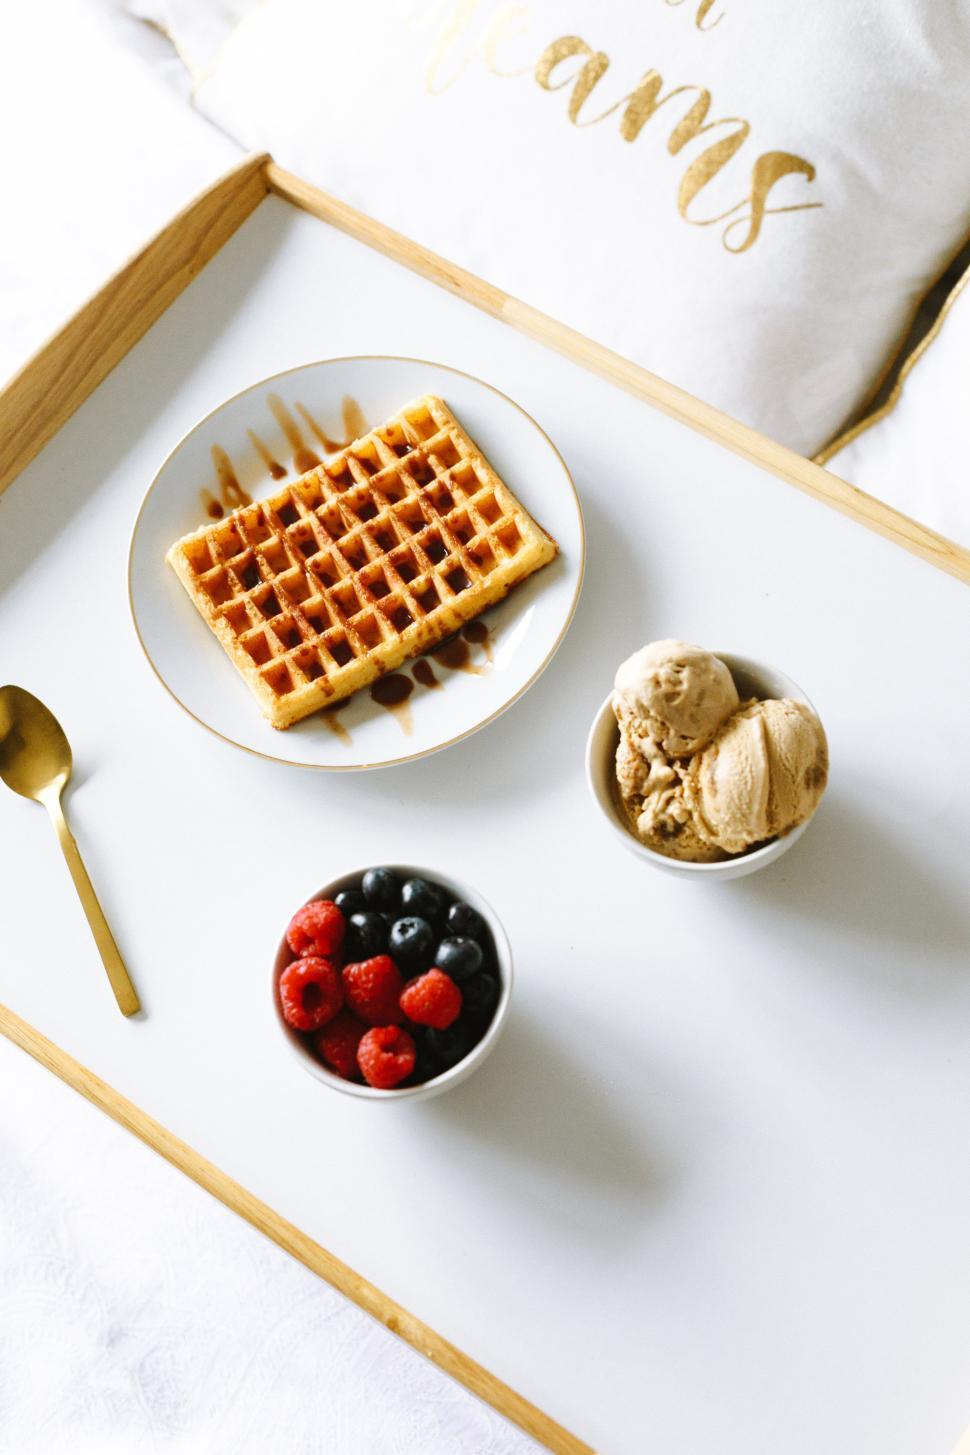 Free Image of A plate of waffles and ice cream with berries on a white tray 